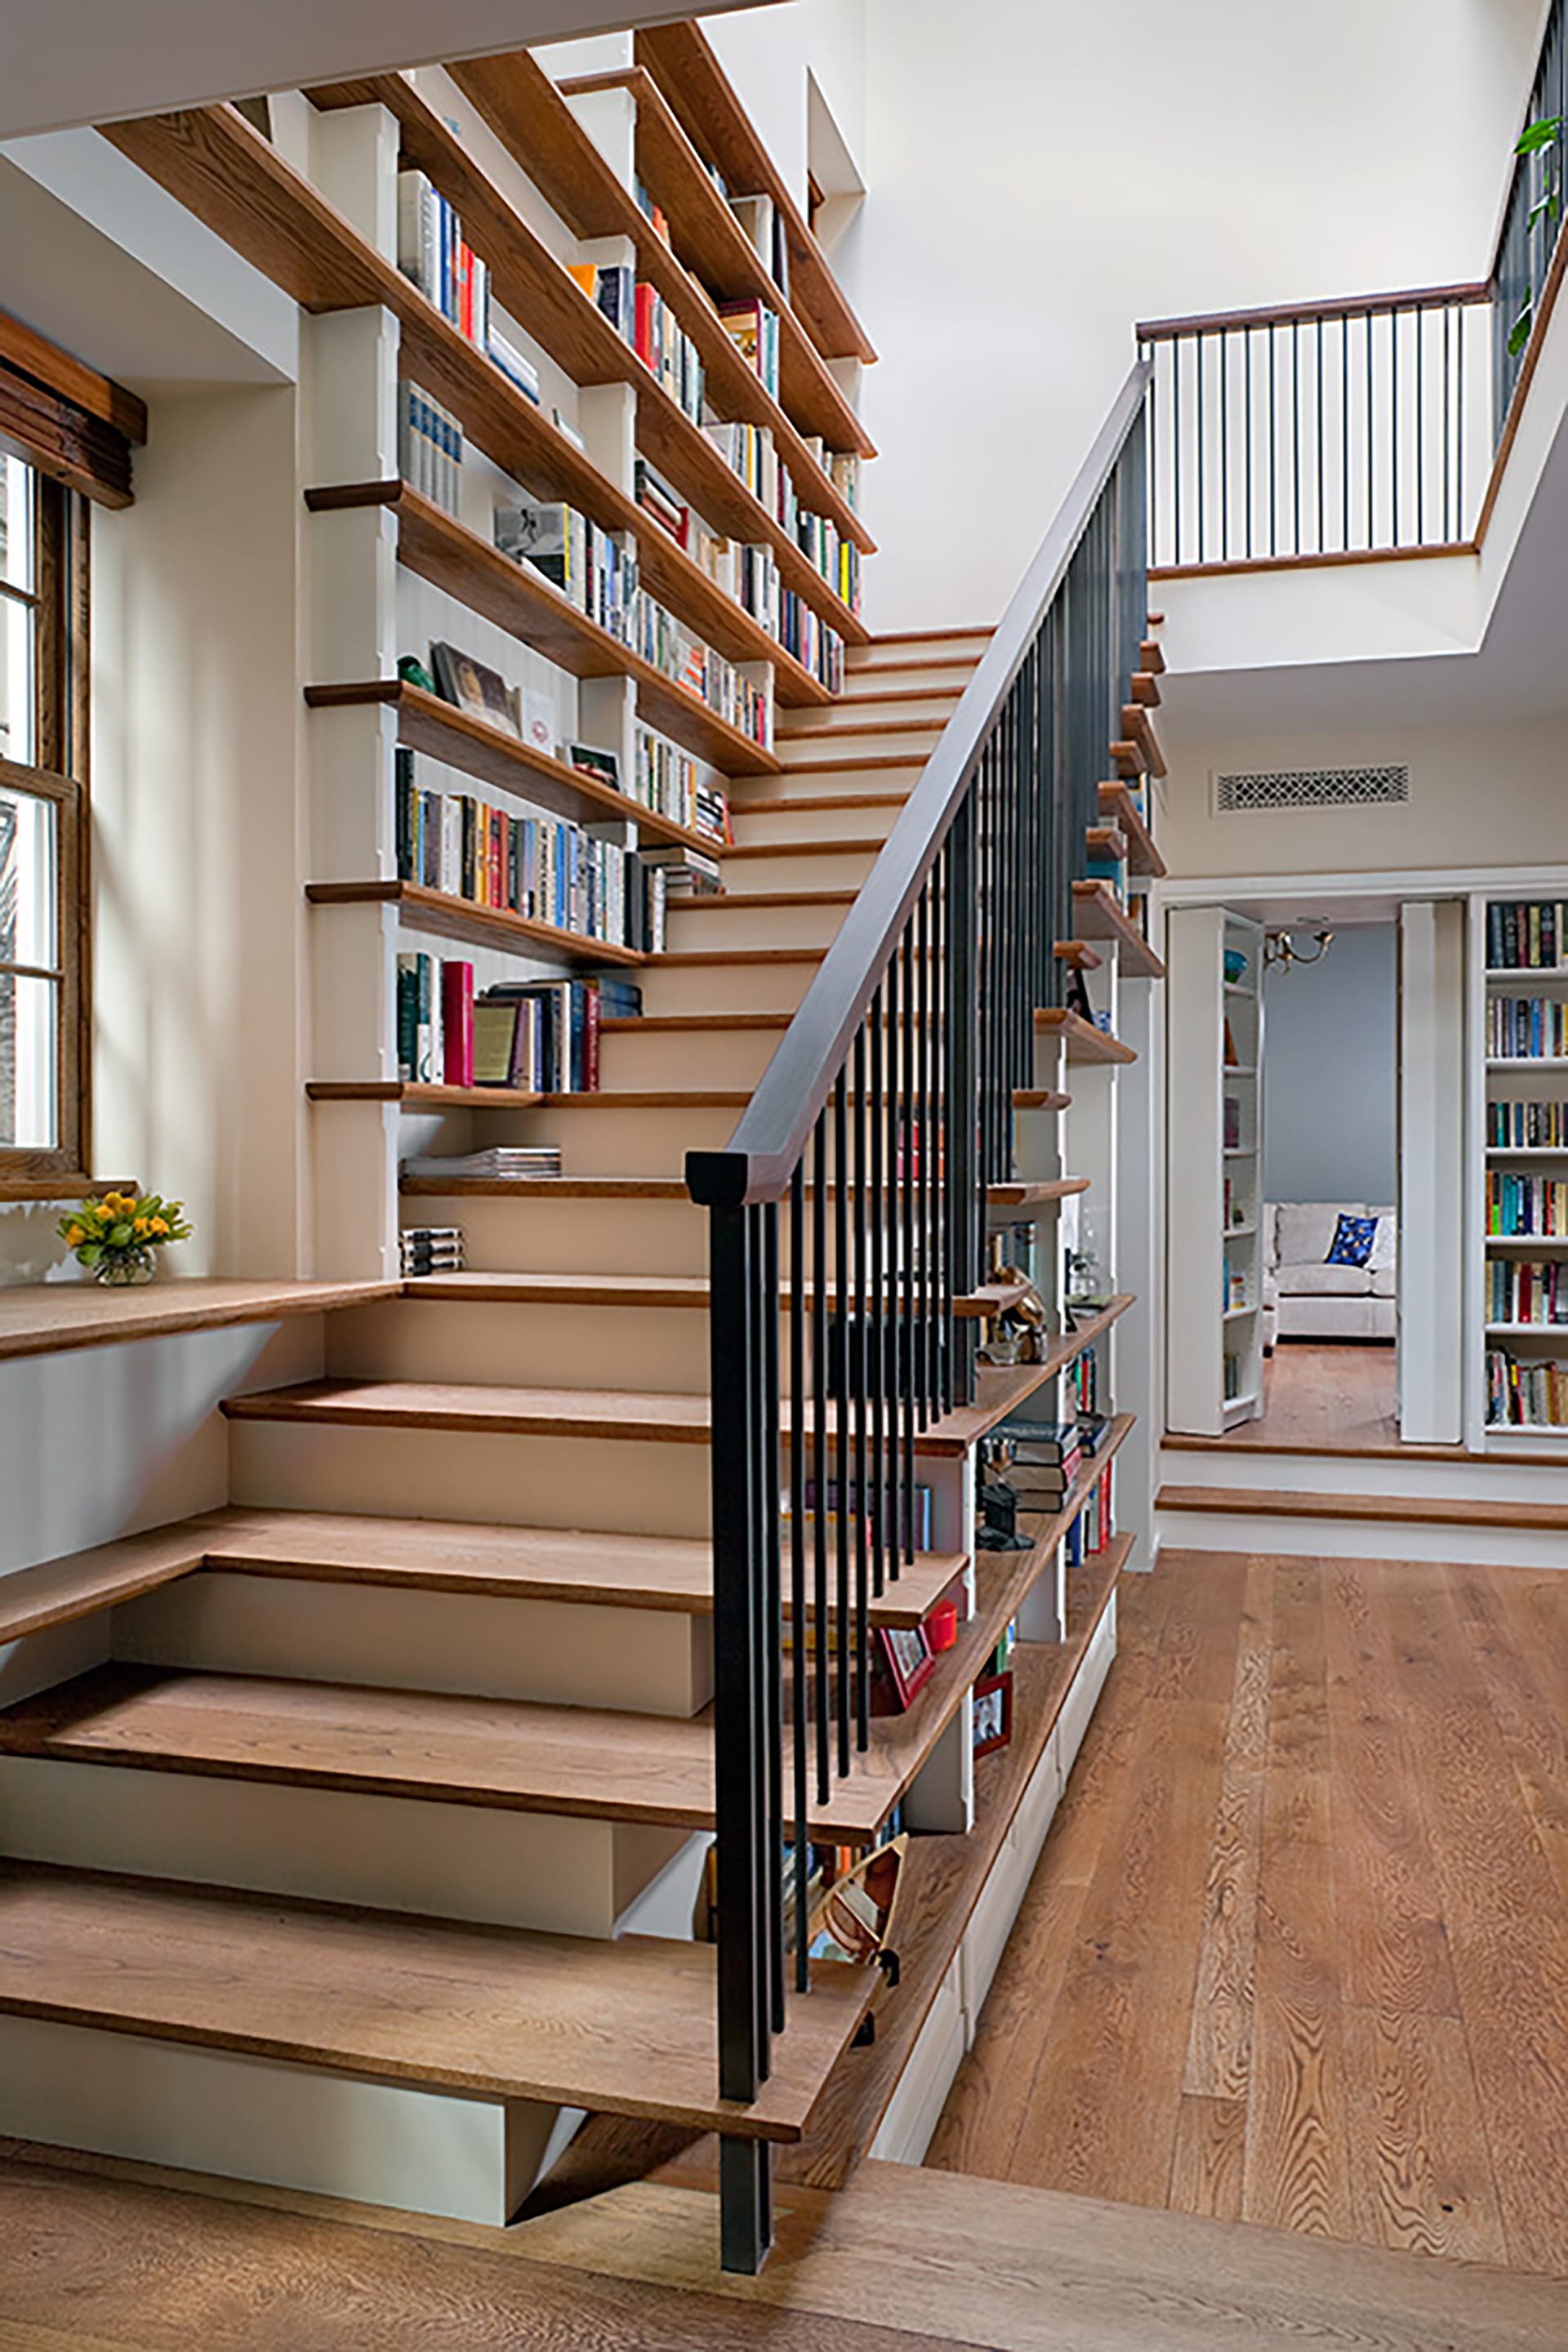 Staircase lined with bookshelves and metal balusters